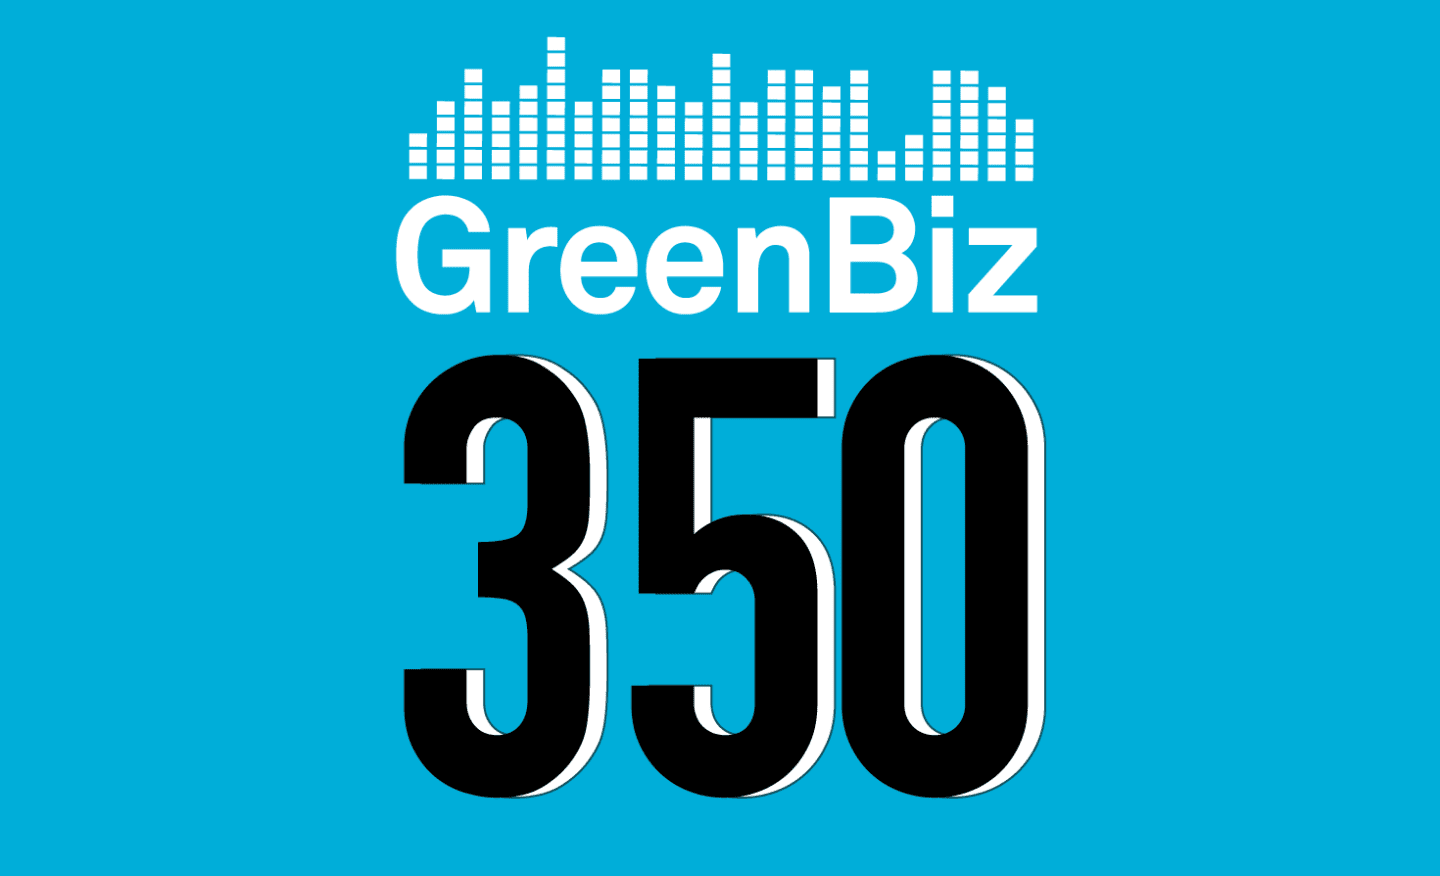 Veris Residential’s Commitment to EV100 Featured on “GreenBiz 350” Podcast